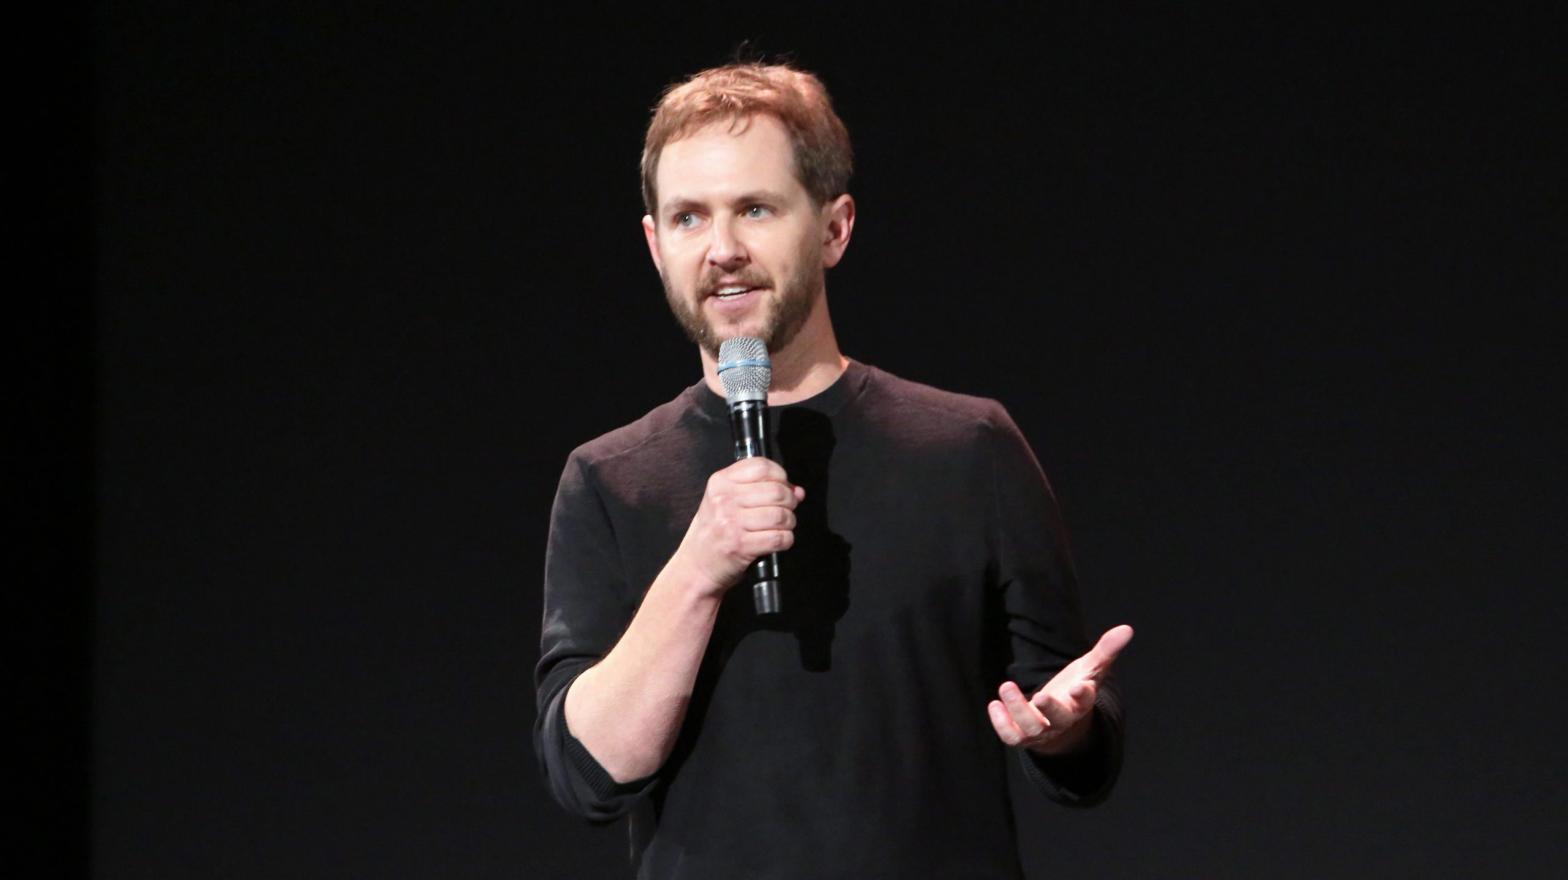 Matt Shakman at the Disney+ Showcase at Disney's D23 EXPO 2019 in Anaheim, California. (Photo: Jesse Grant/Getty Images for Disney, Getty Images)